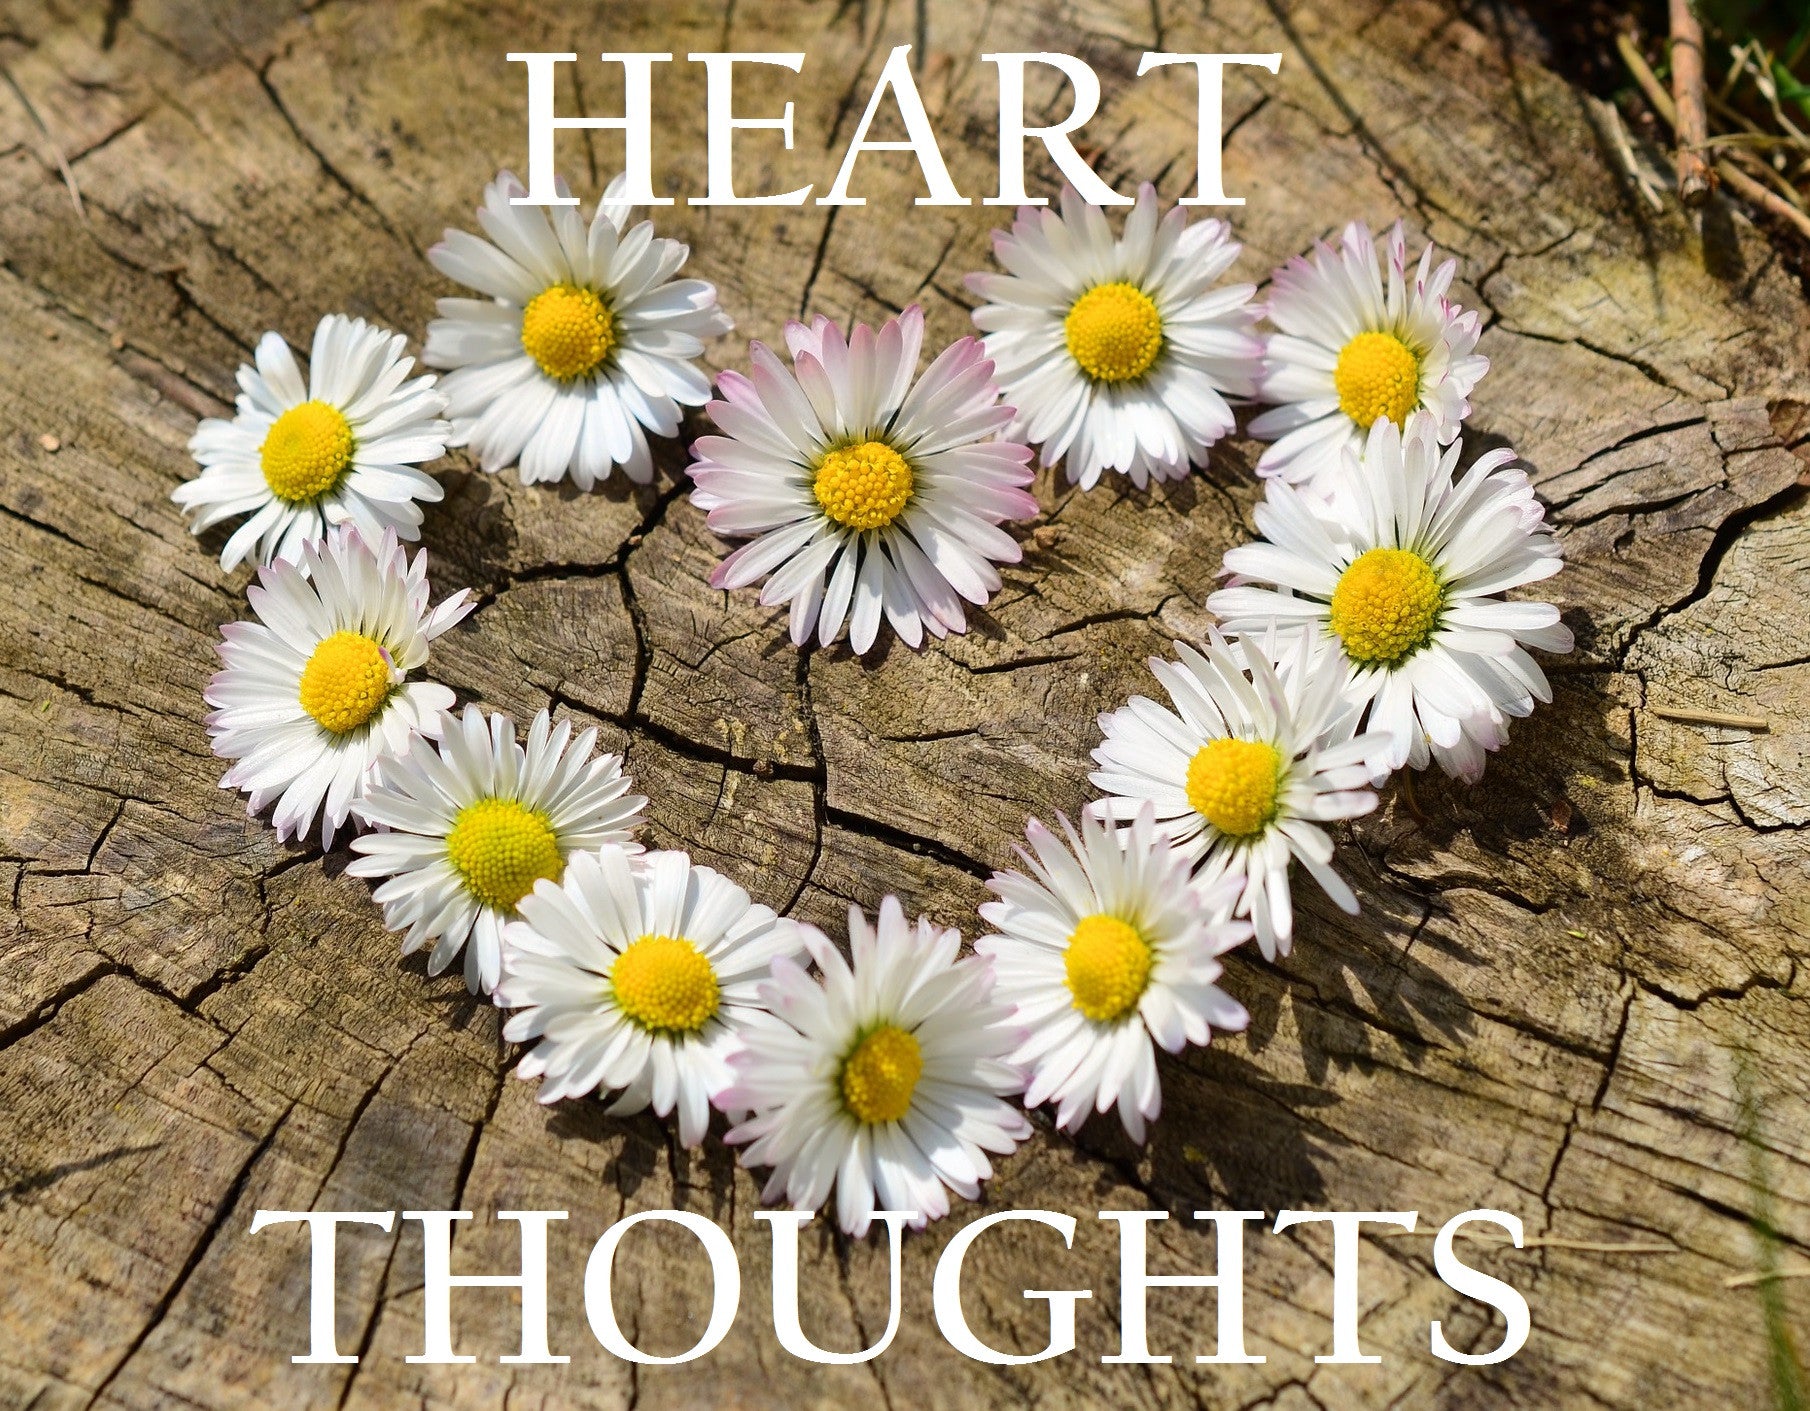 Introducing Heart Thoughts